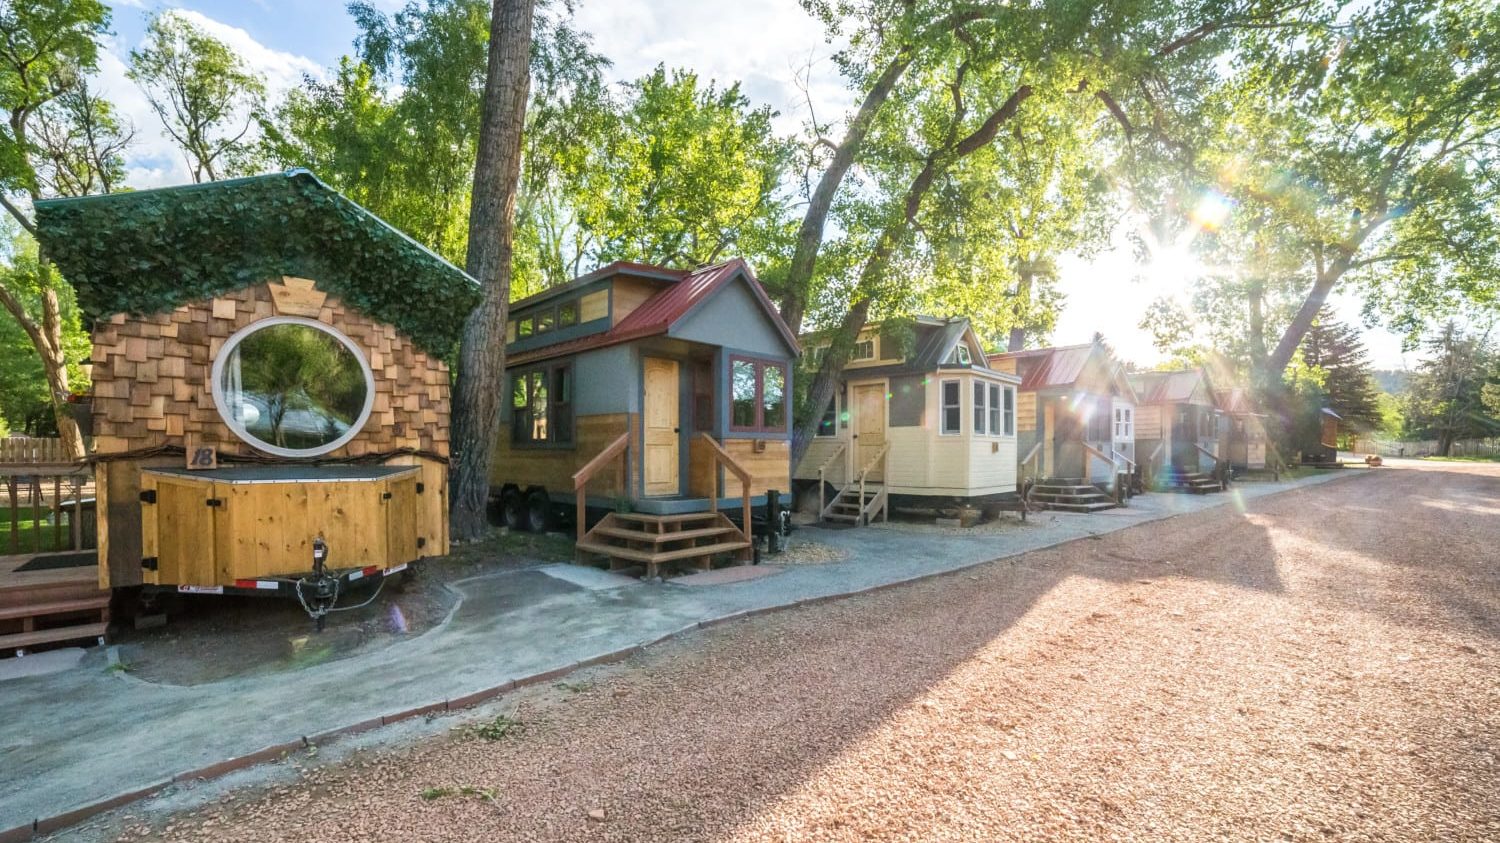 Tiny House Resorts Give You A Taste Of Tiny Home Life - Simplemost